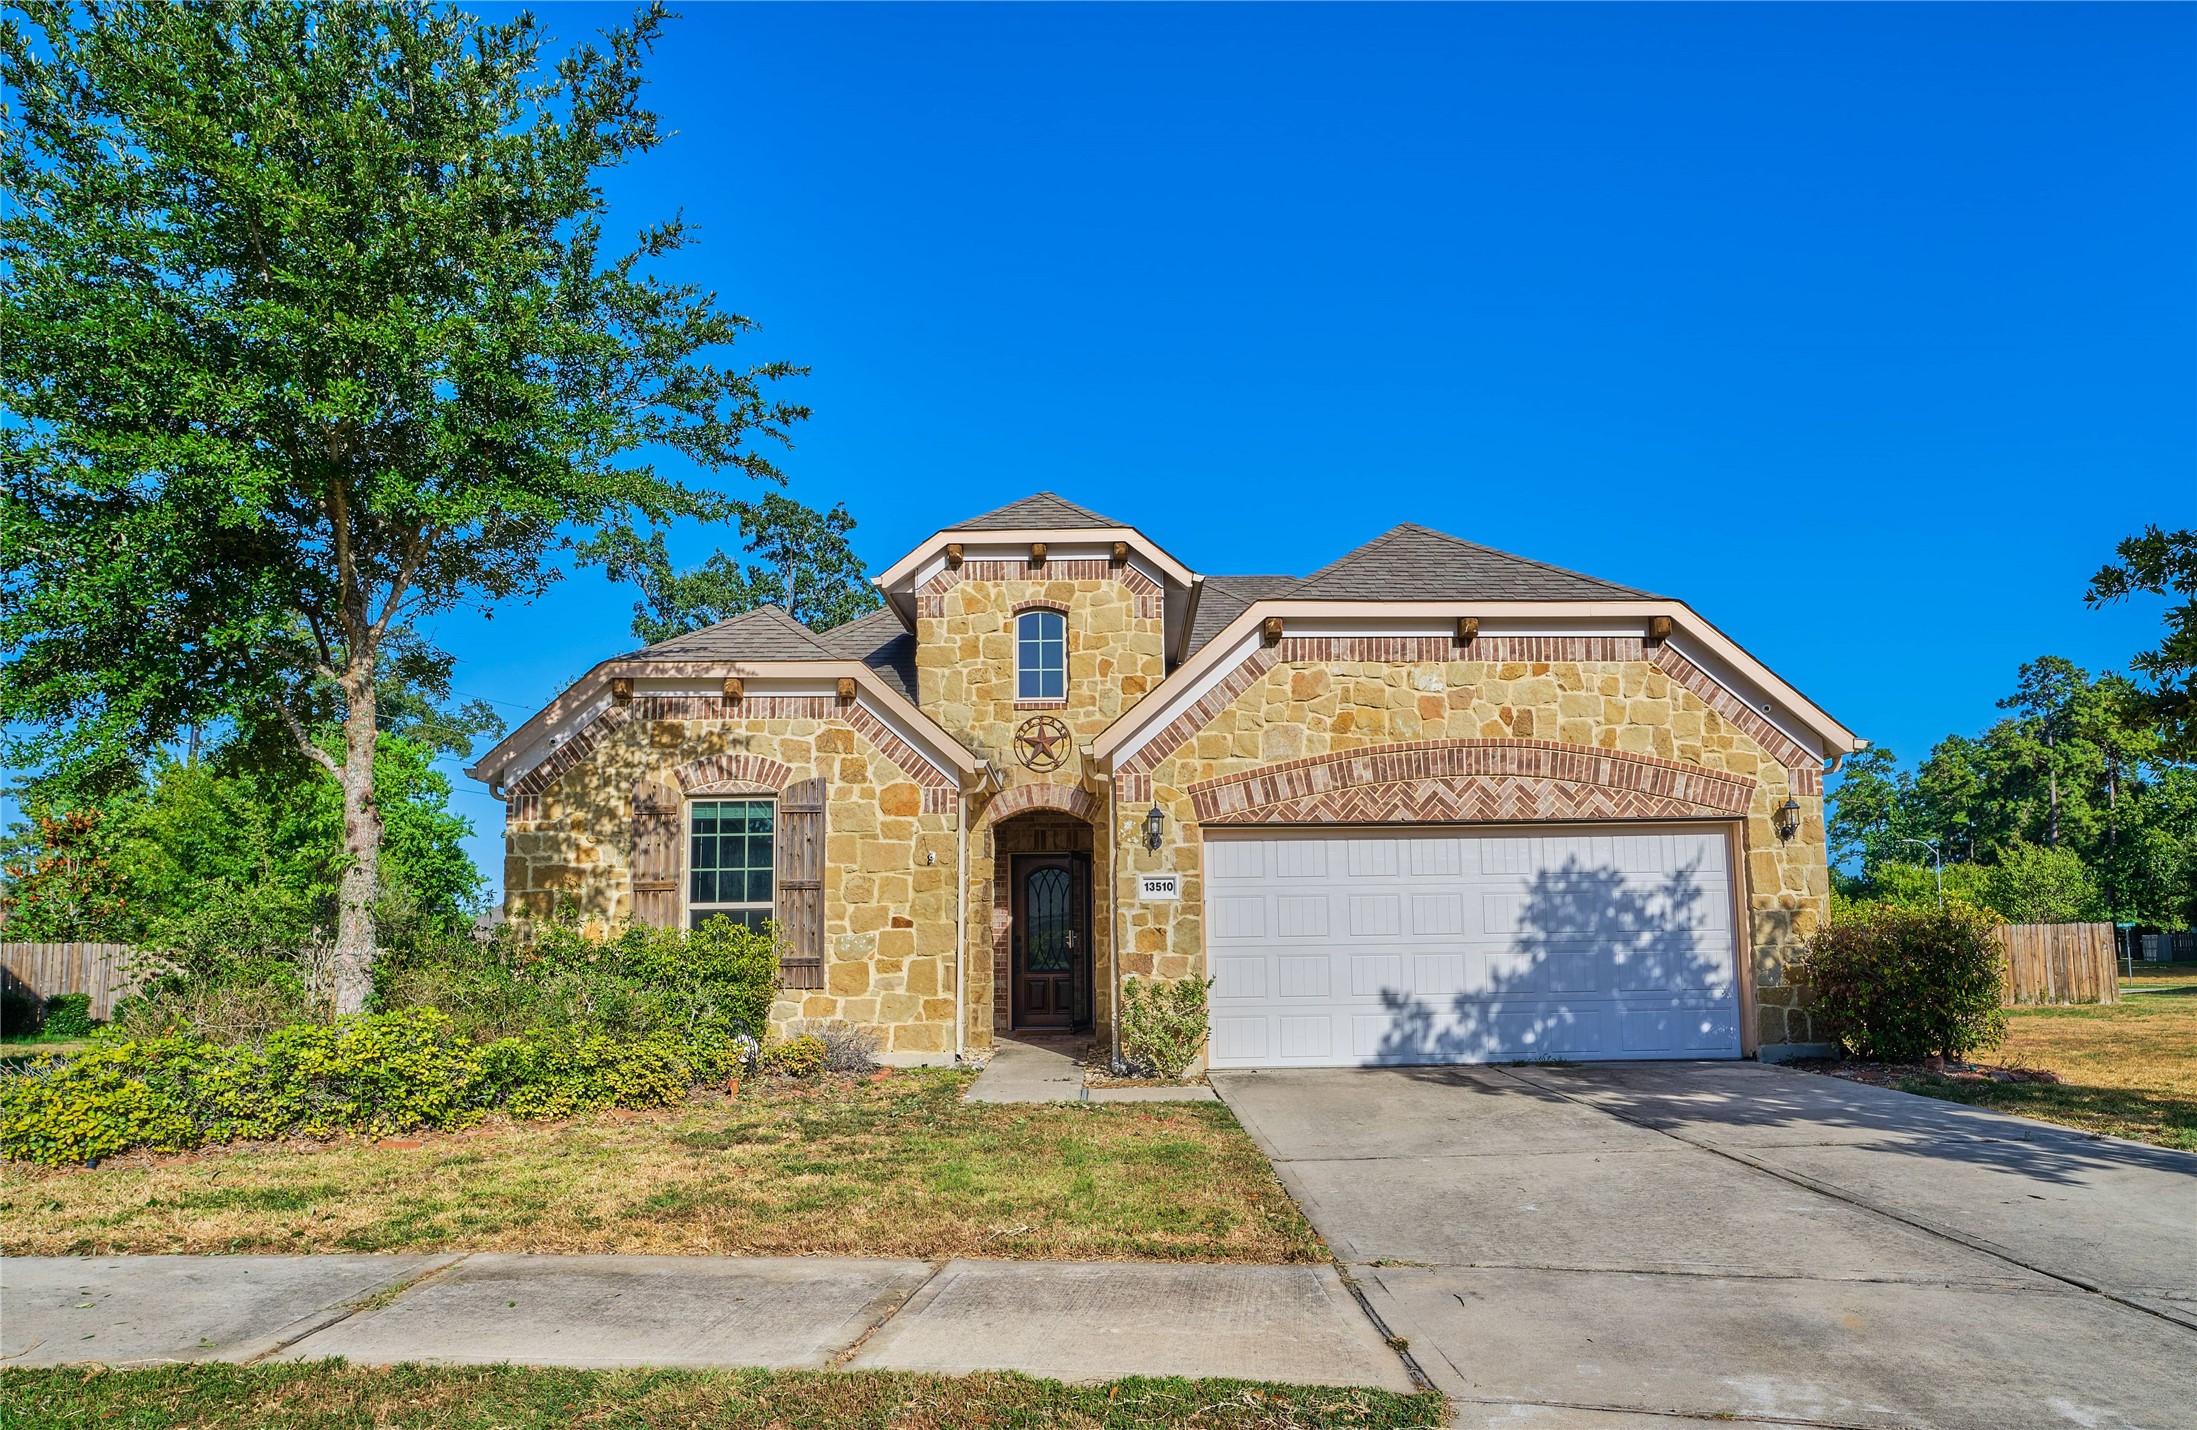 Houston 2-story, 4-bed 13510 Lake Willoughby Lane